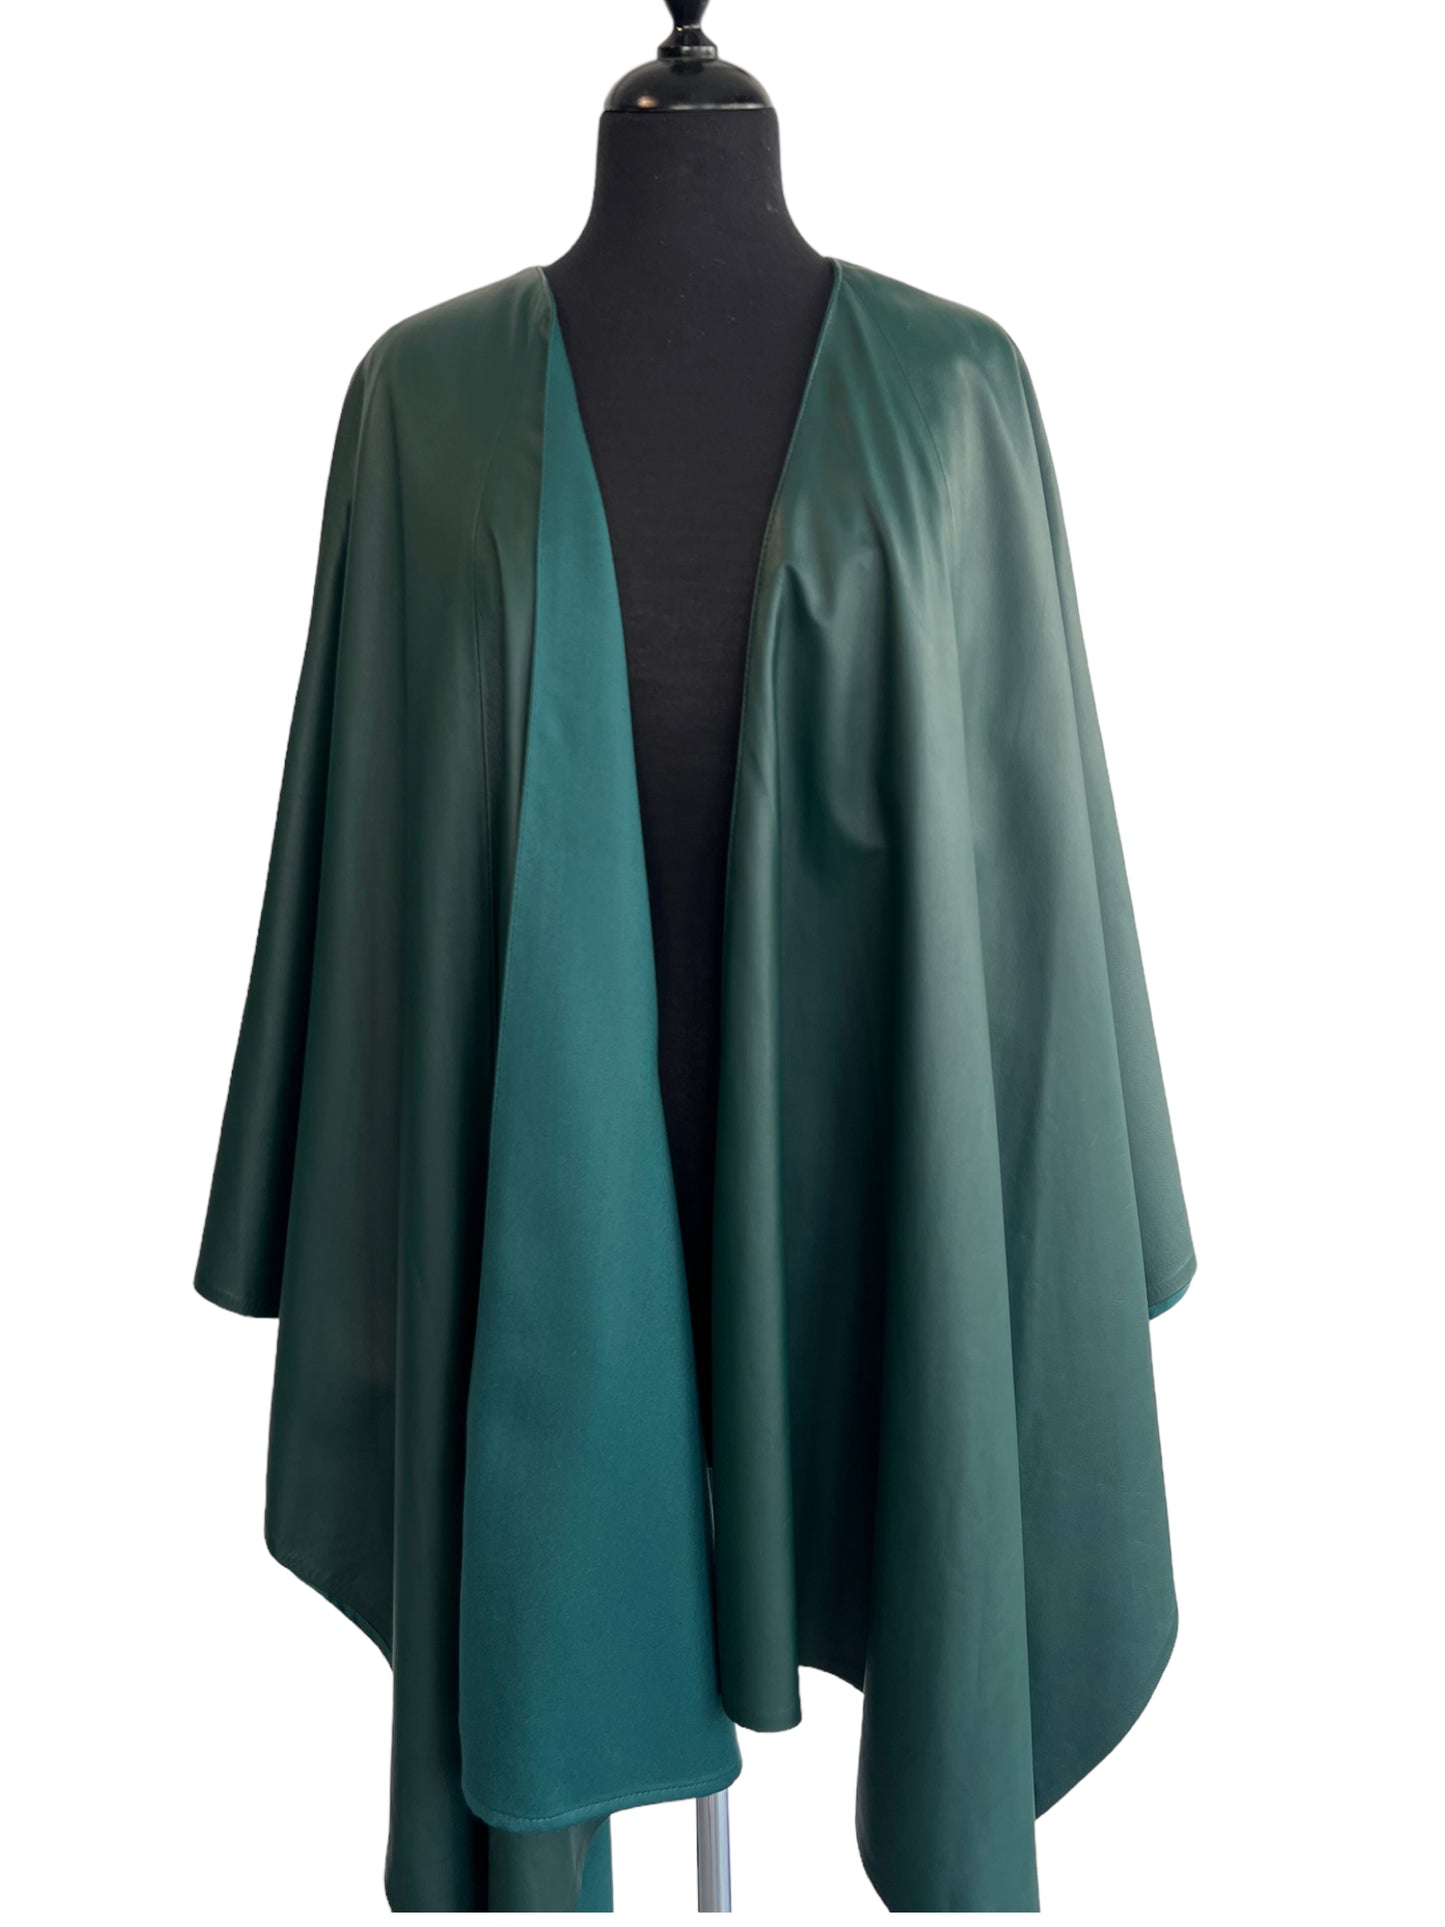 Pritch London -  Leather Cape - One Size